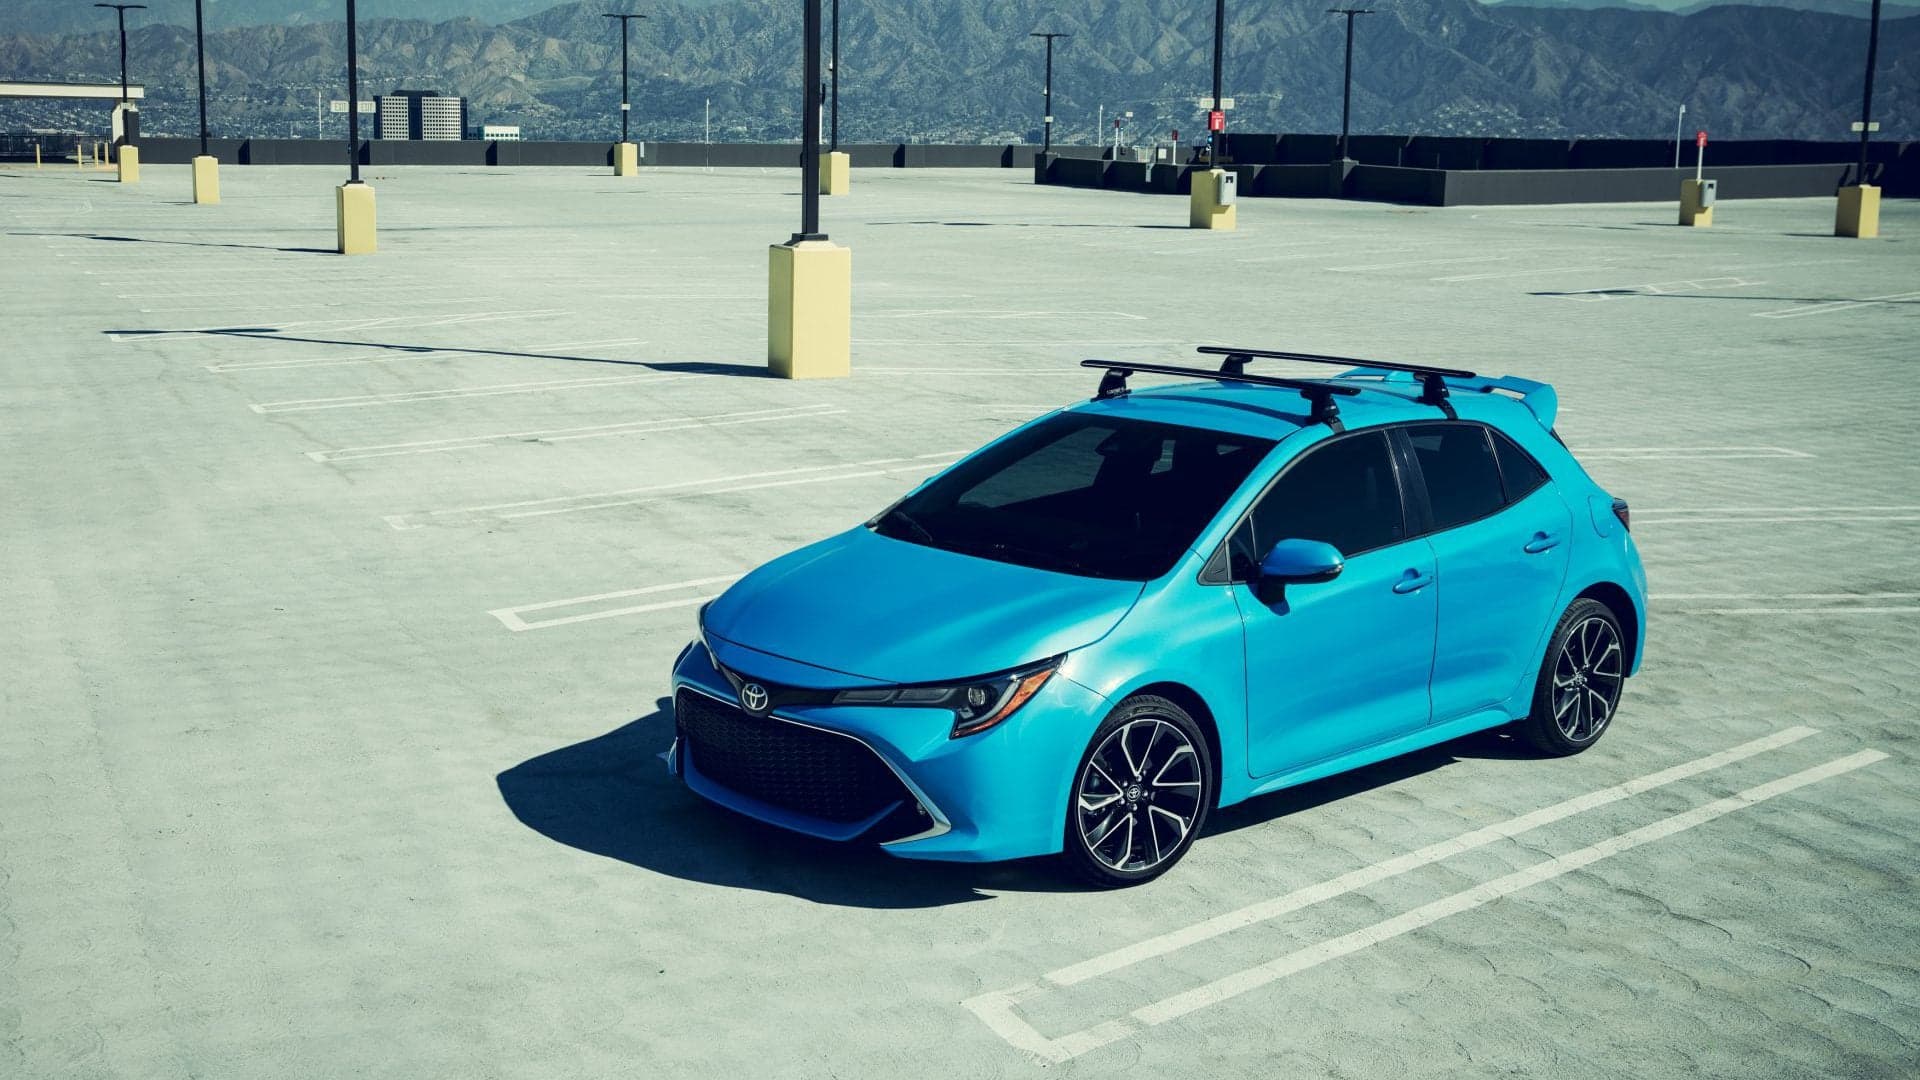 This Is the 2019 Toyota Corolla Hatchback